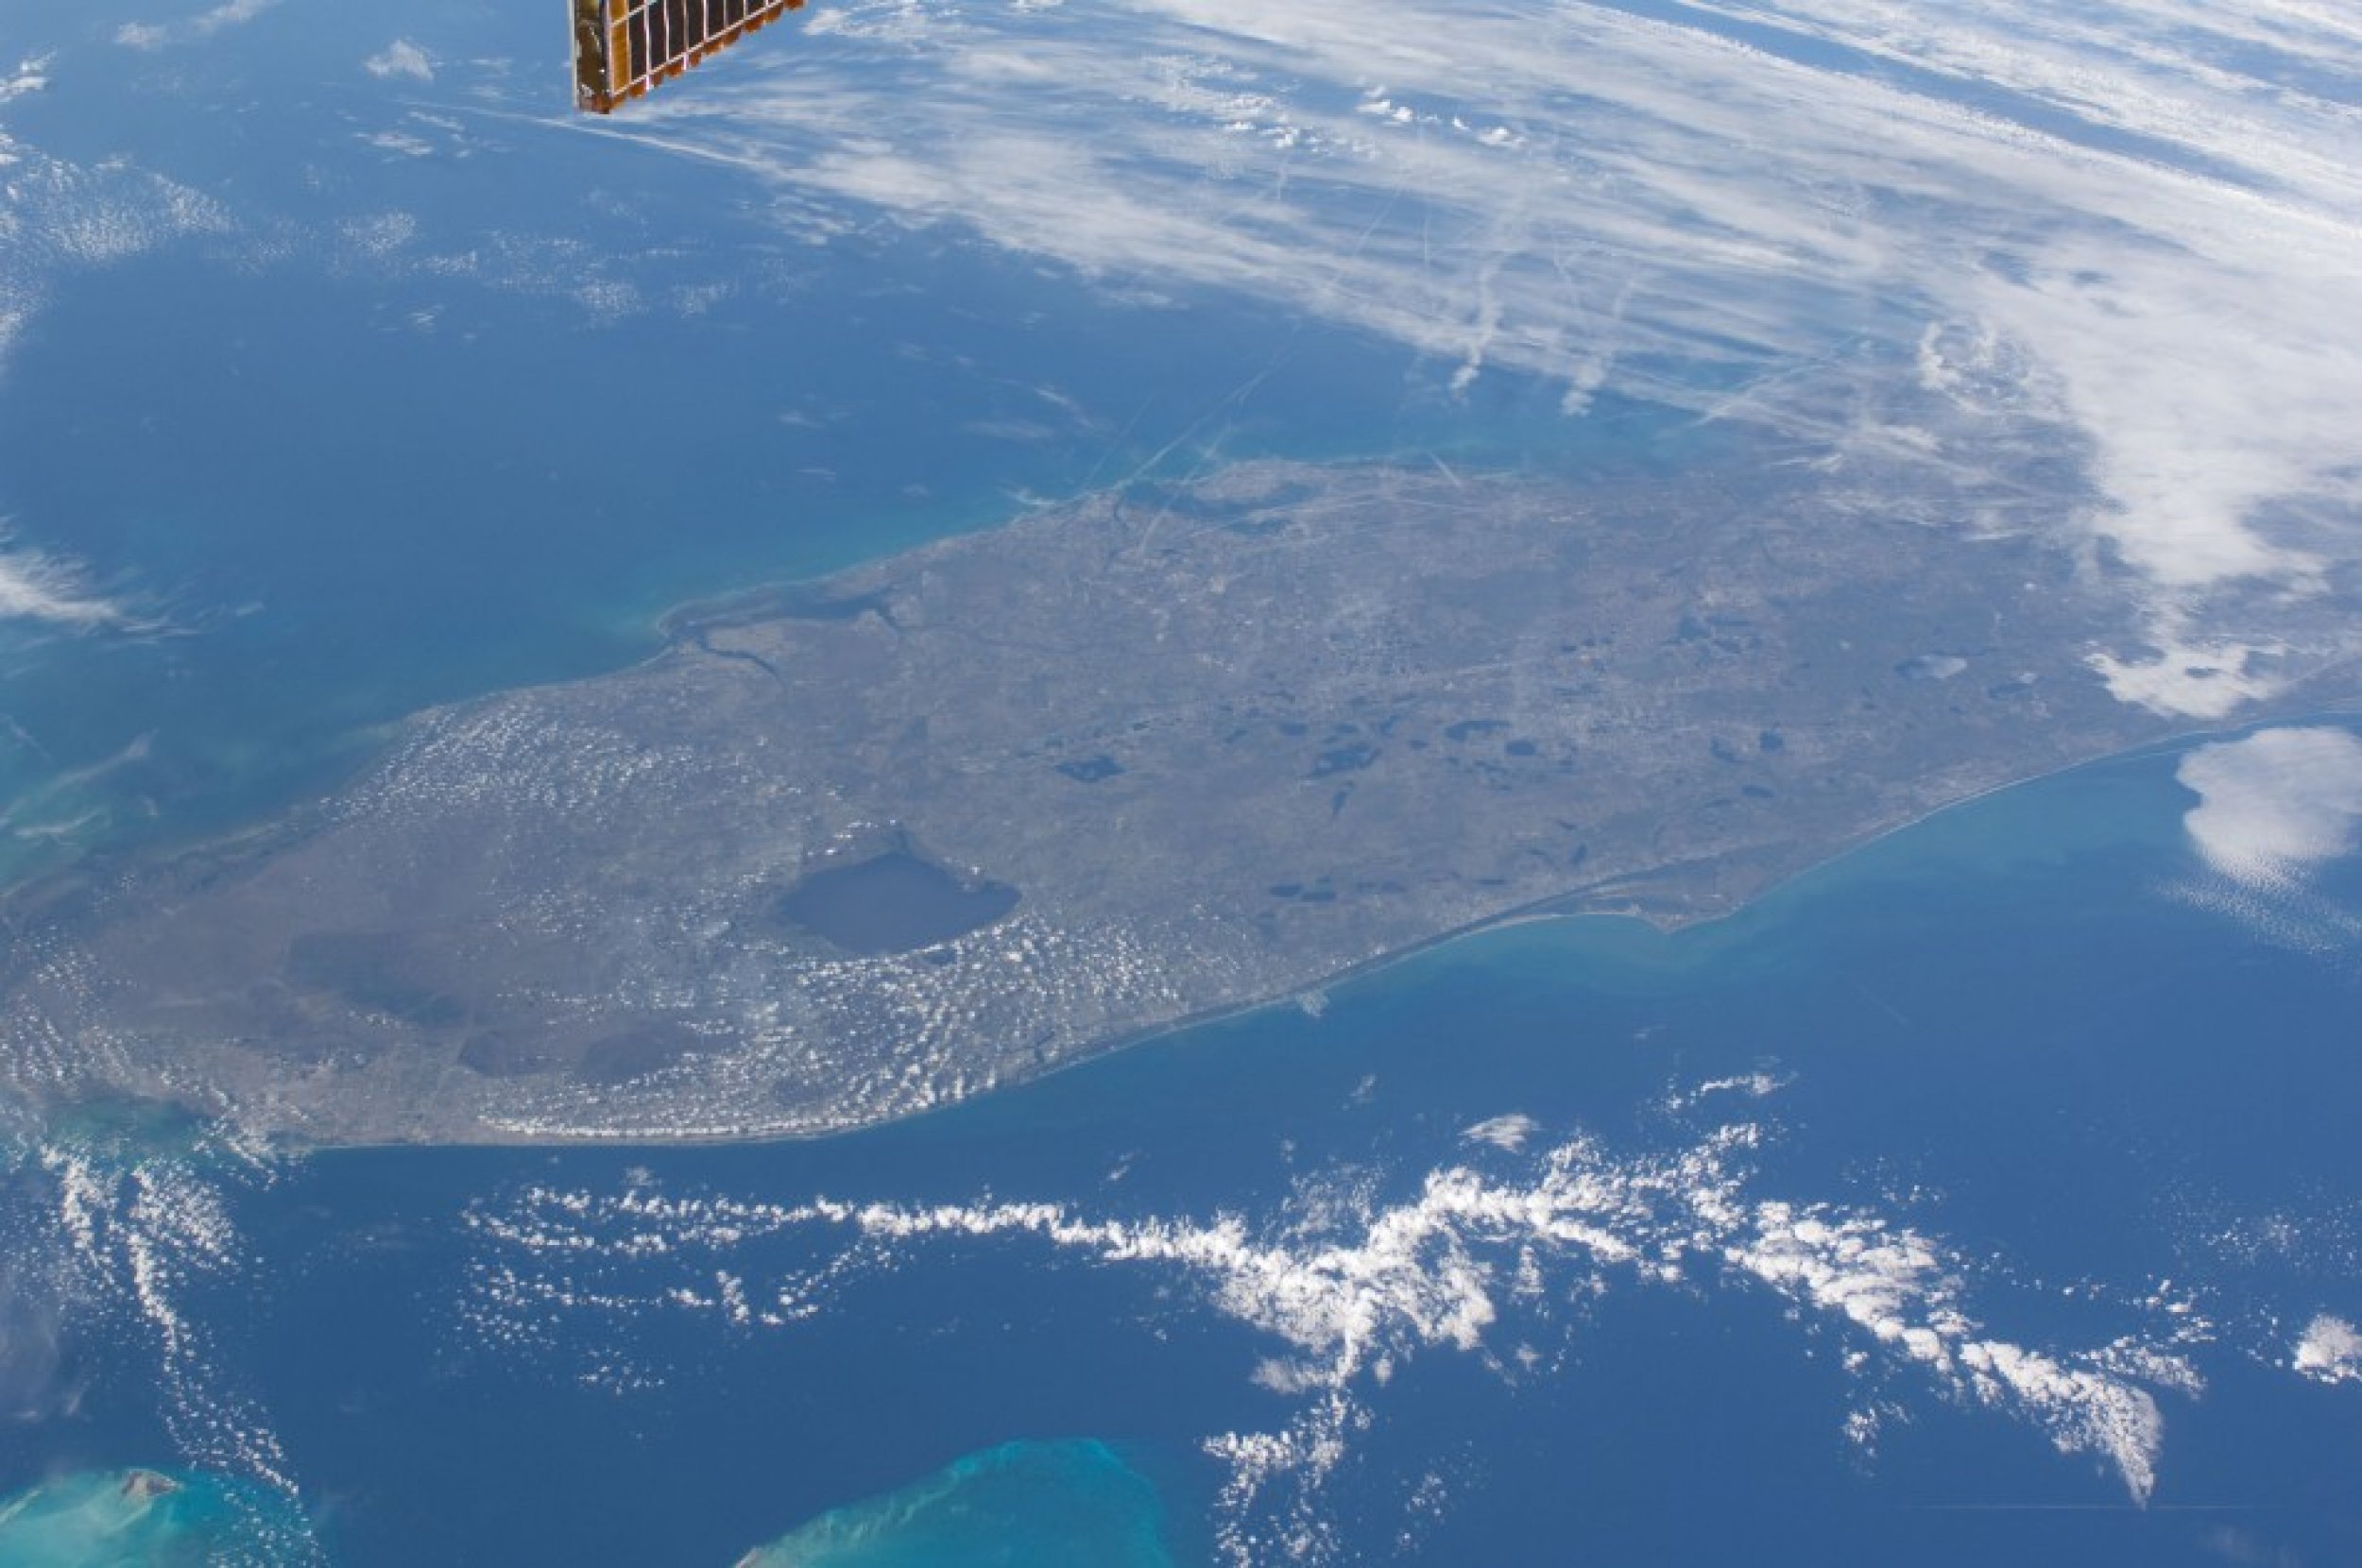 ISS Image